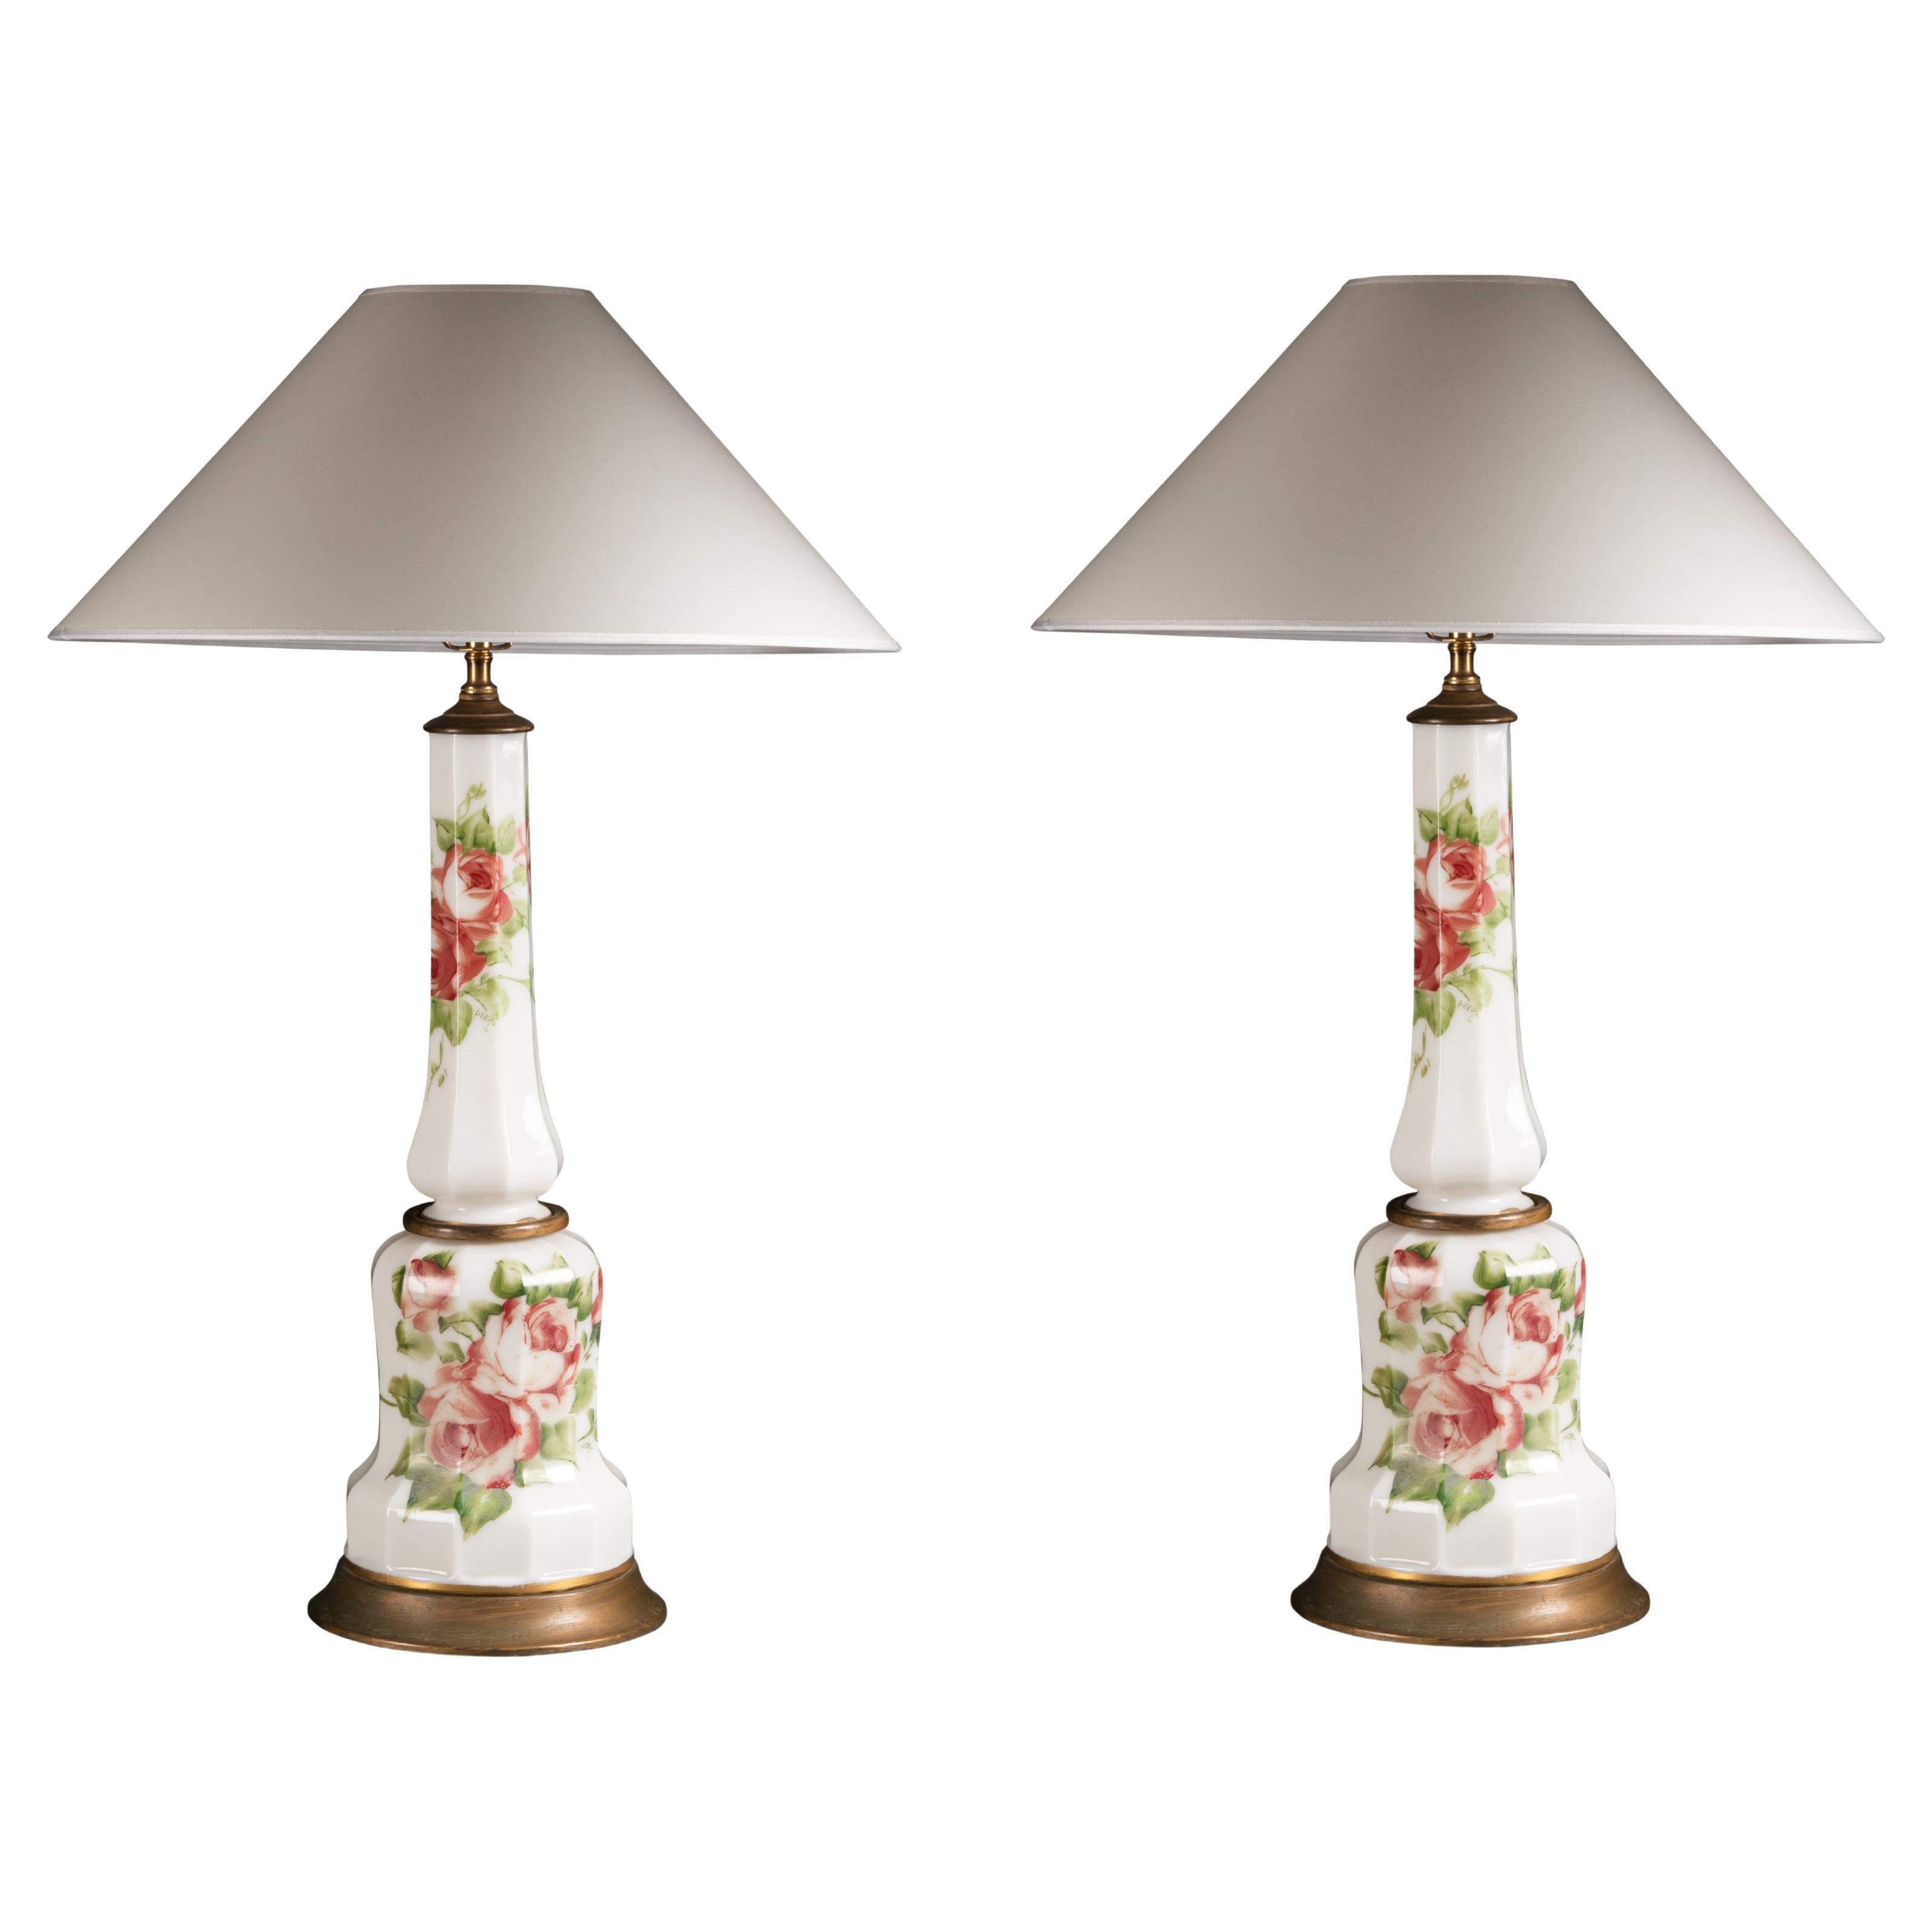 Pair of White Overlay Glass Lamps with Hand Painted Roses, Circa 1920 For Sale